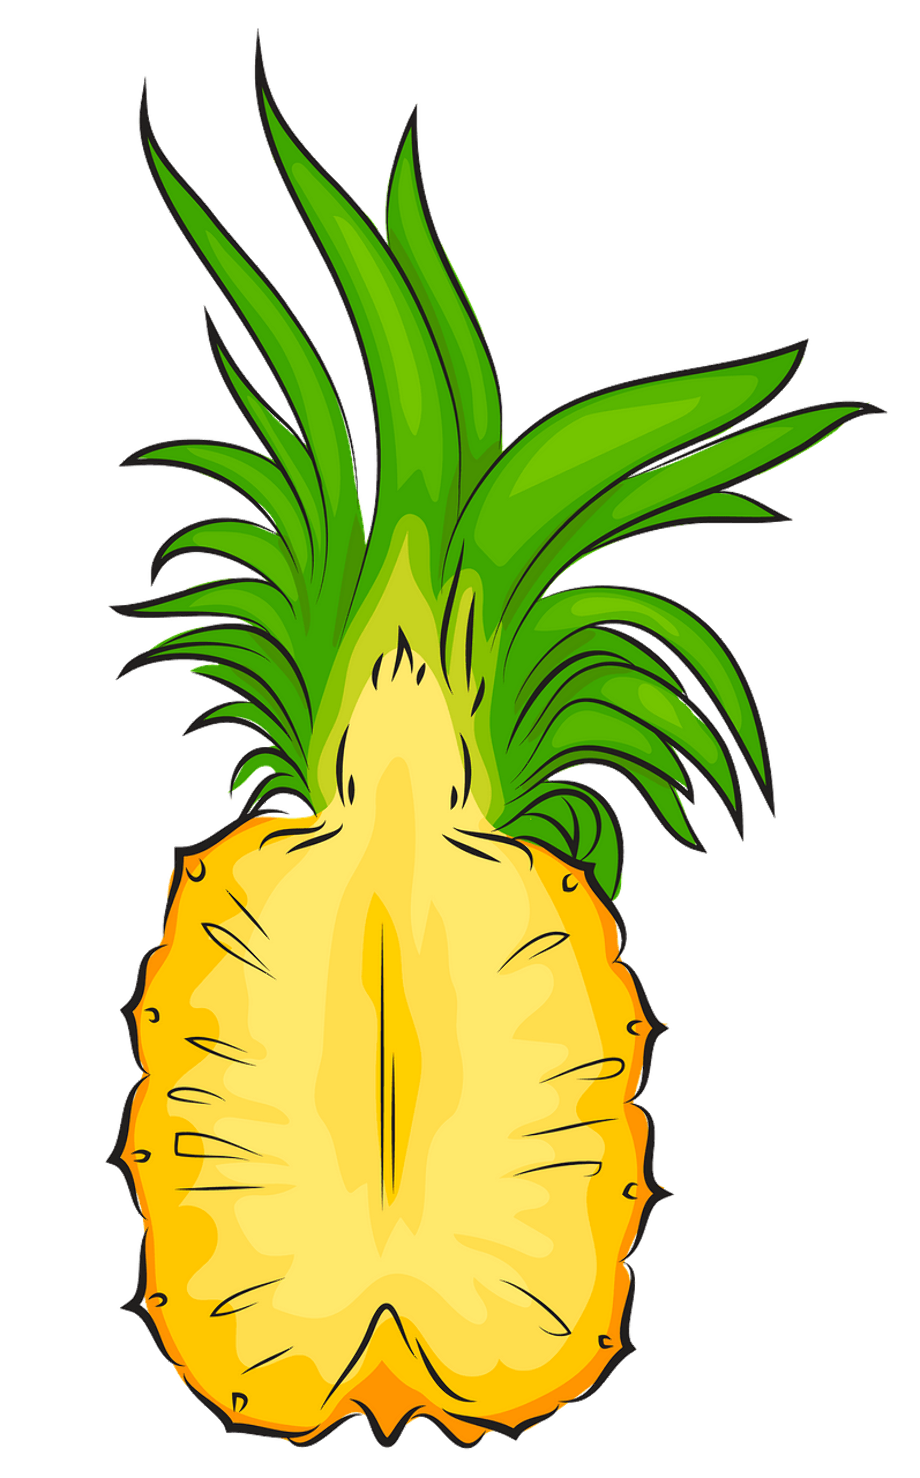 Download High Quality pineapple clip art cut out Transparent PNG Images